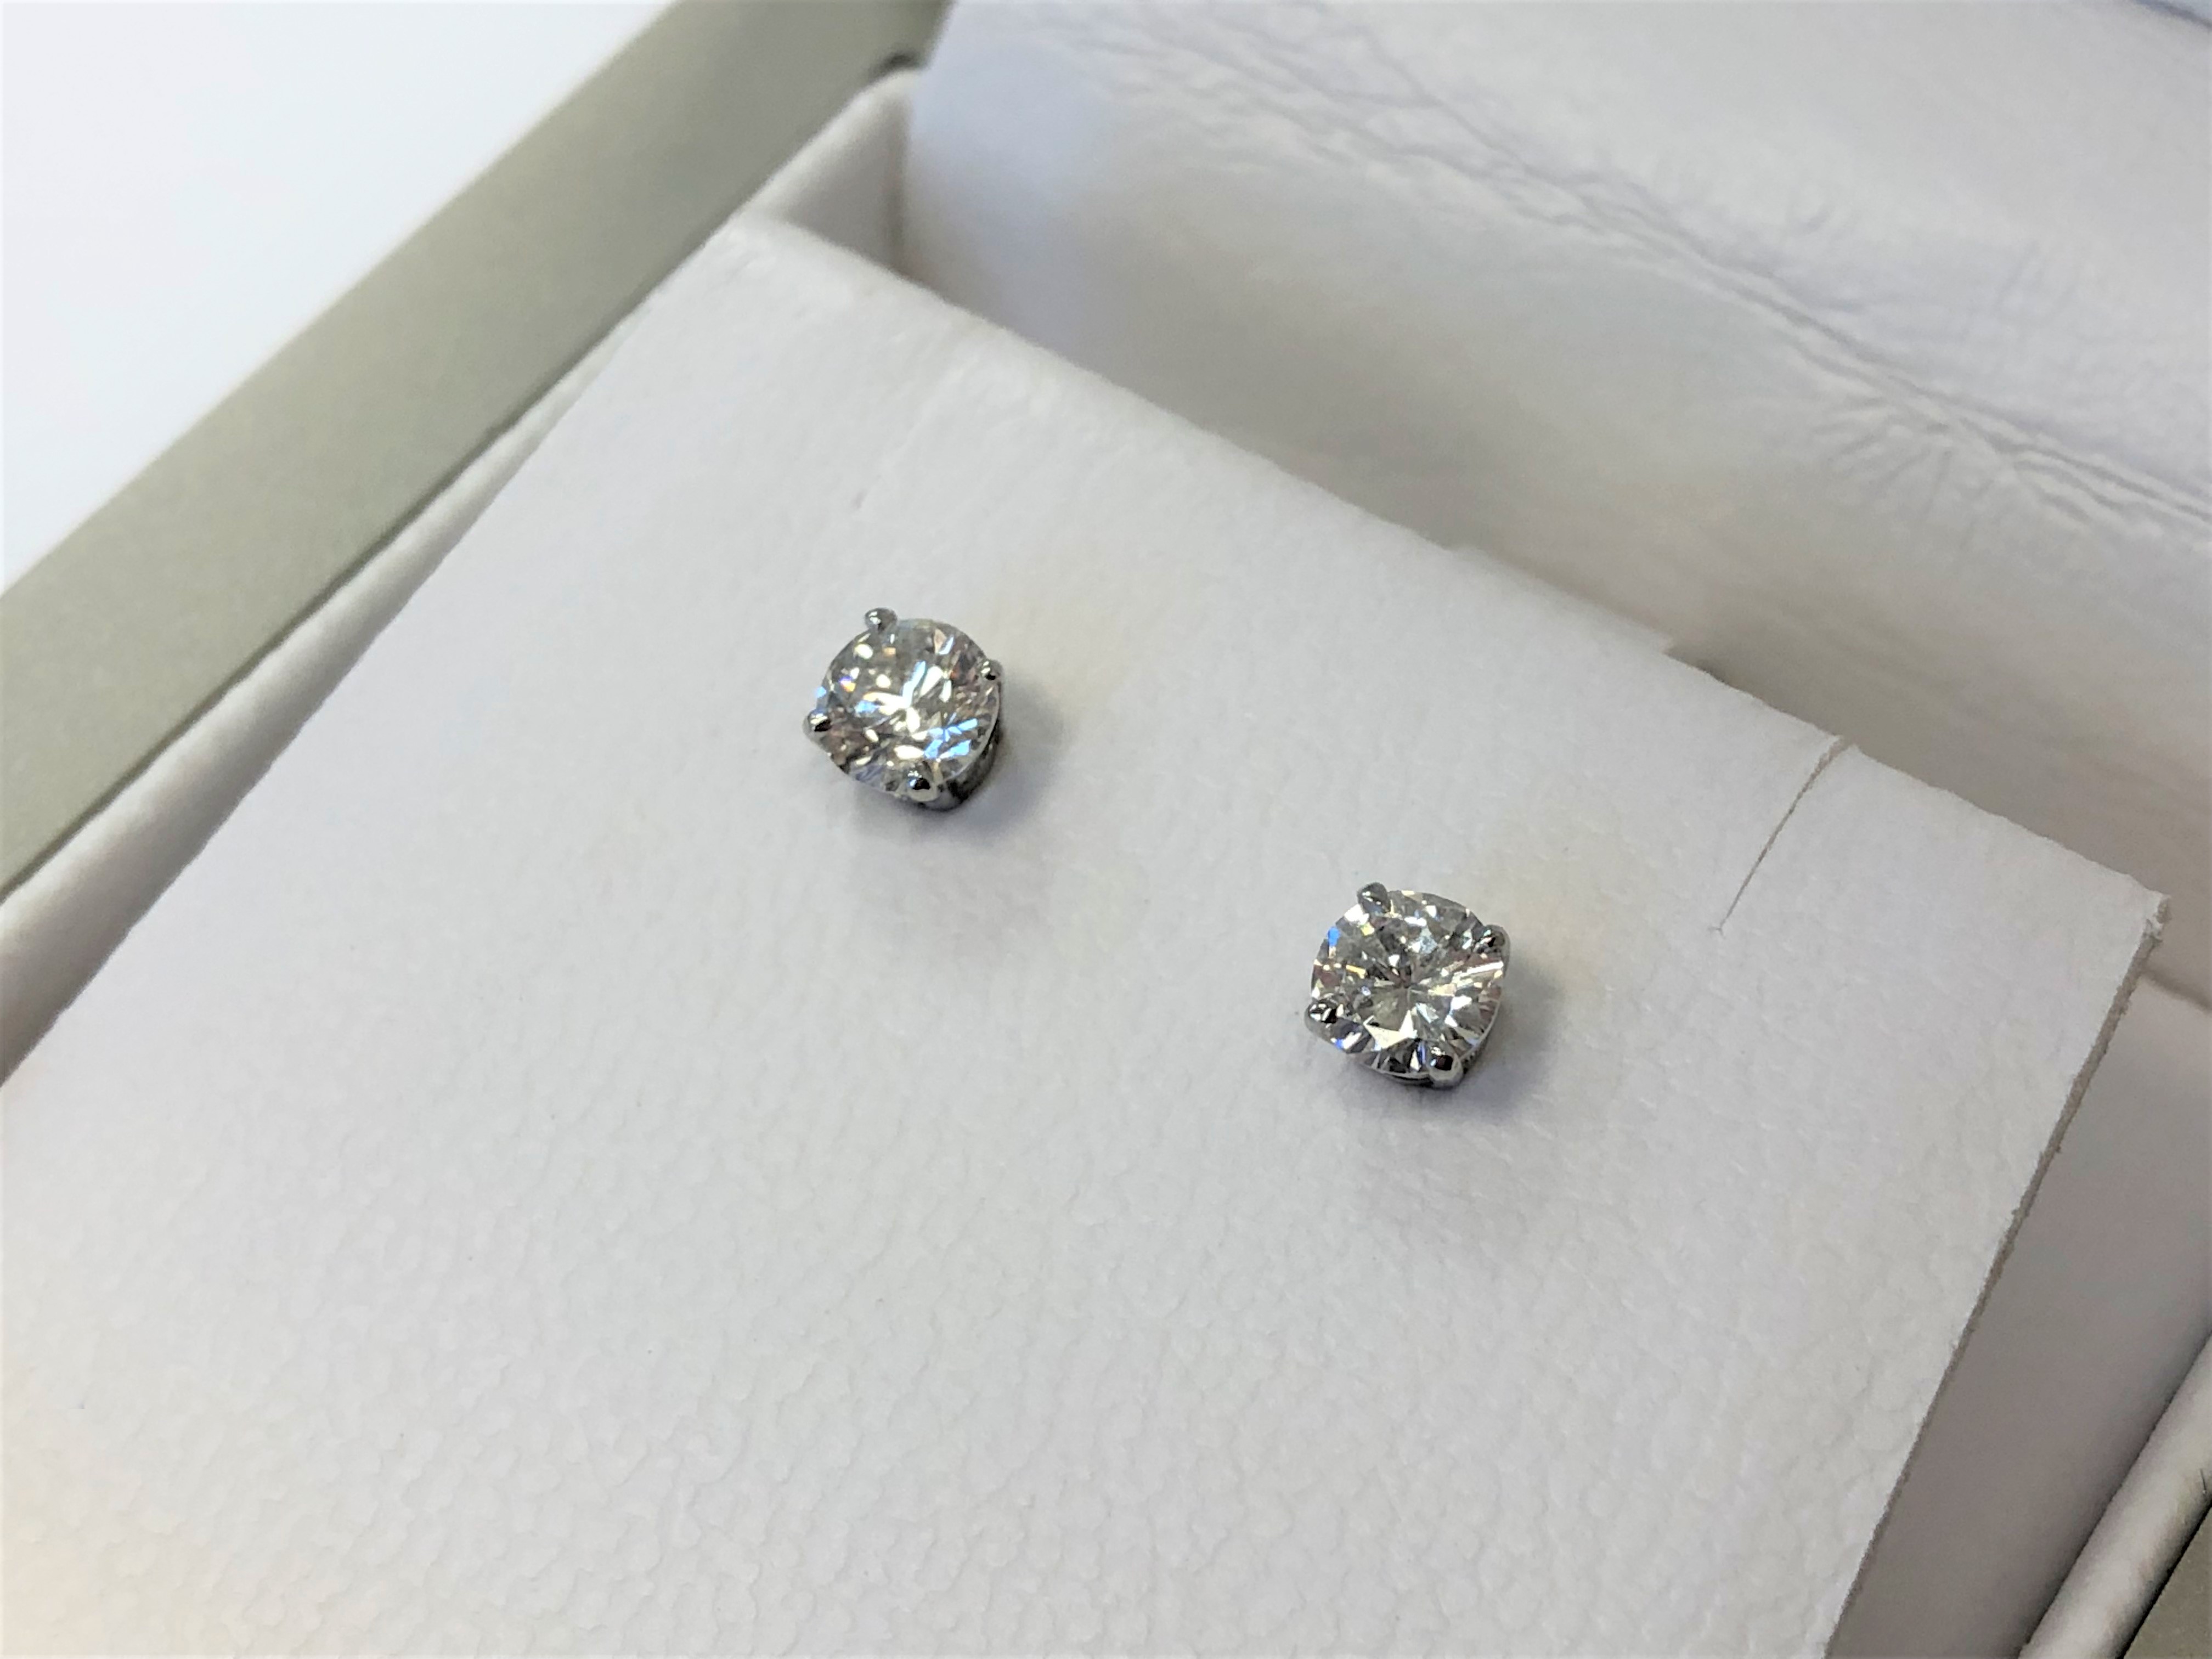 A pair of 18ct white gold diamond solitaire earrings, approximately 0.